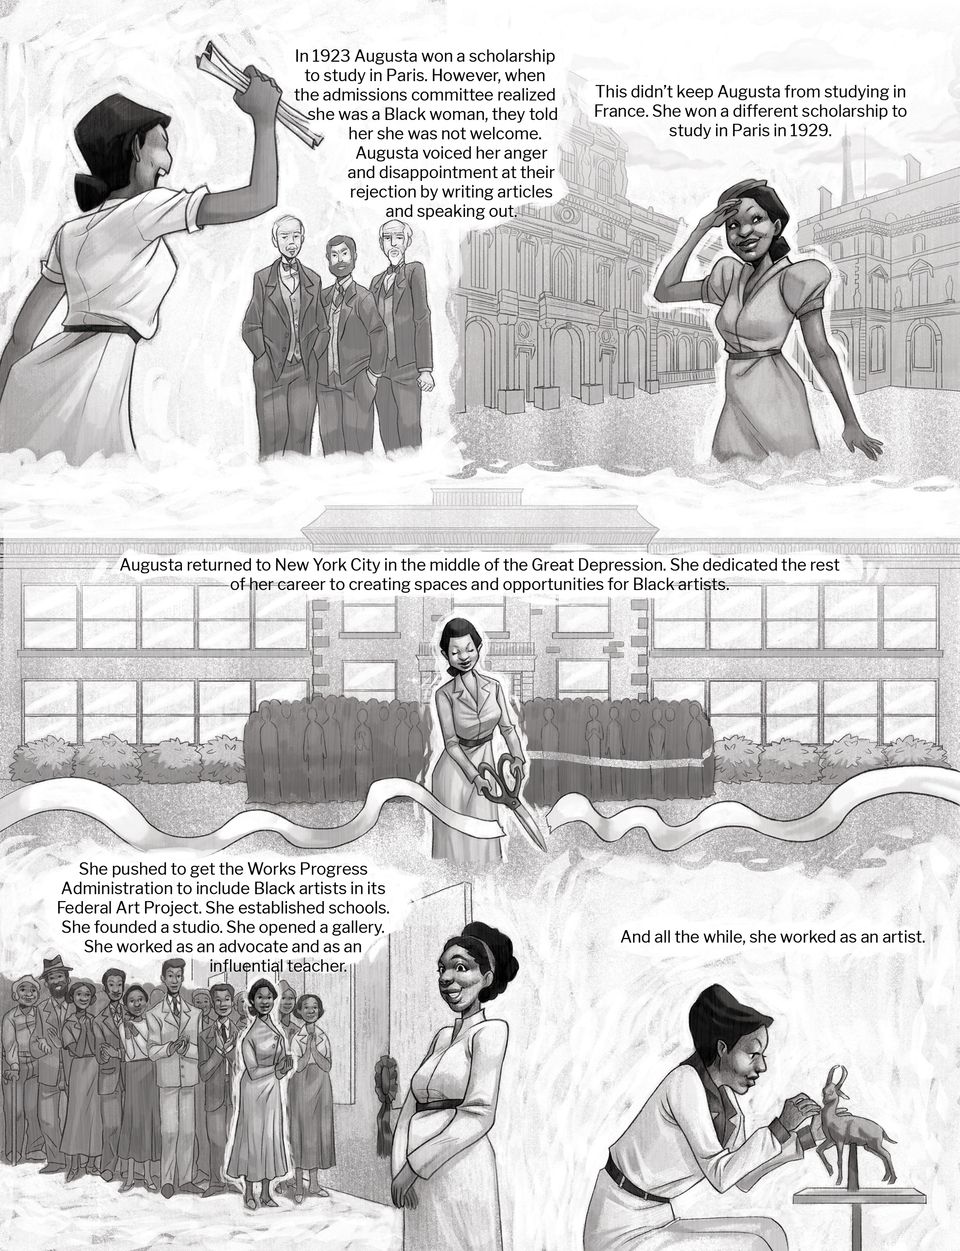 A highly detailed comic with five panels showing Augusta Savage